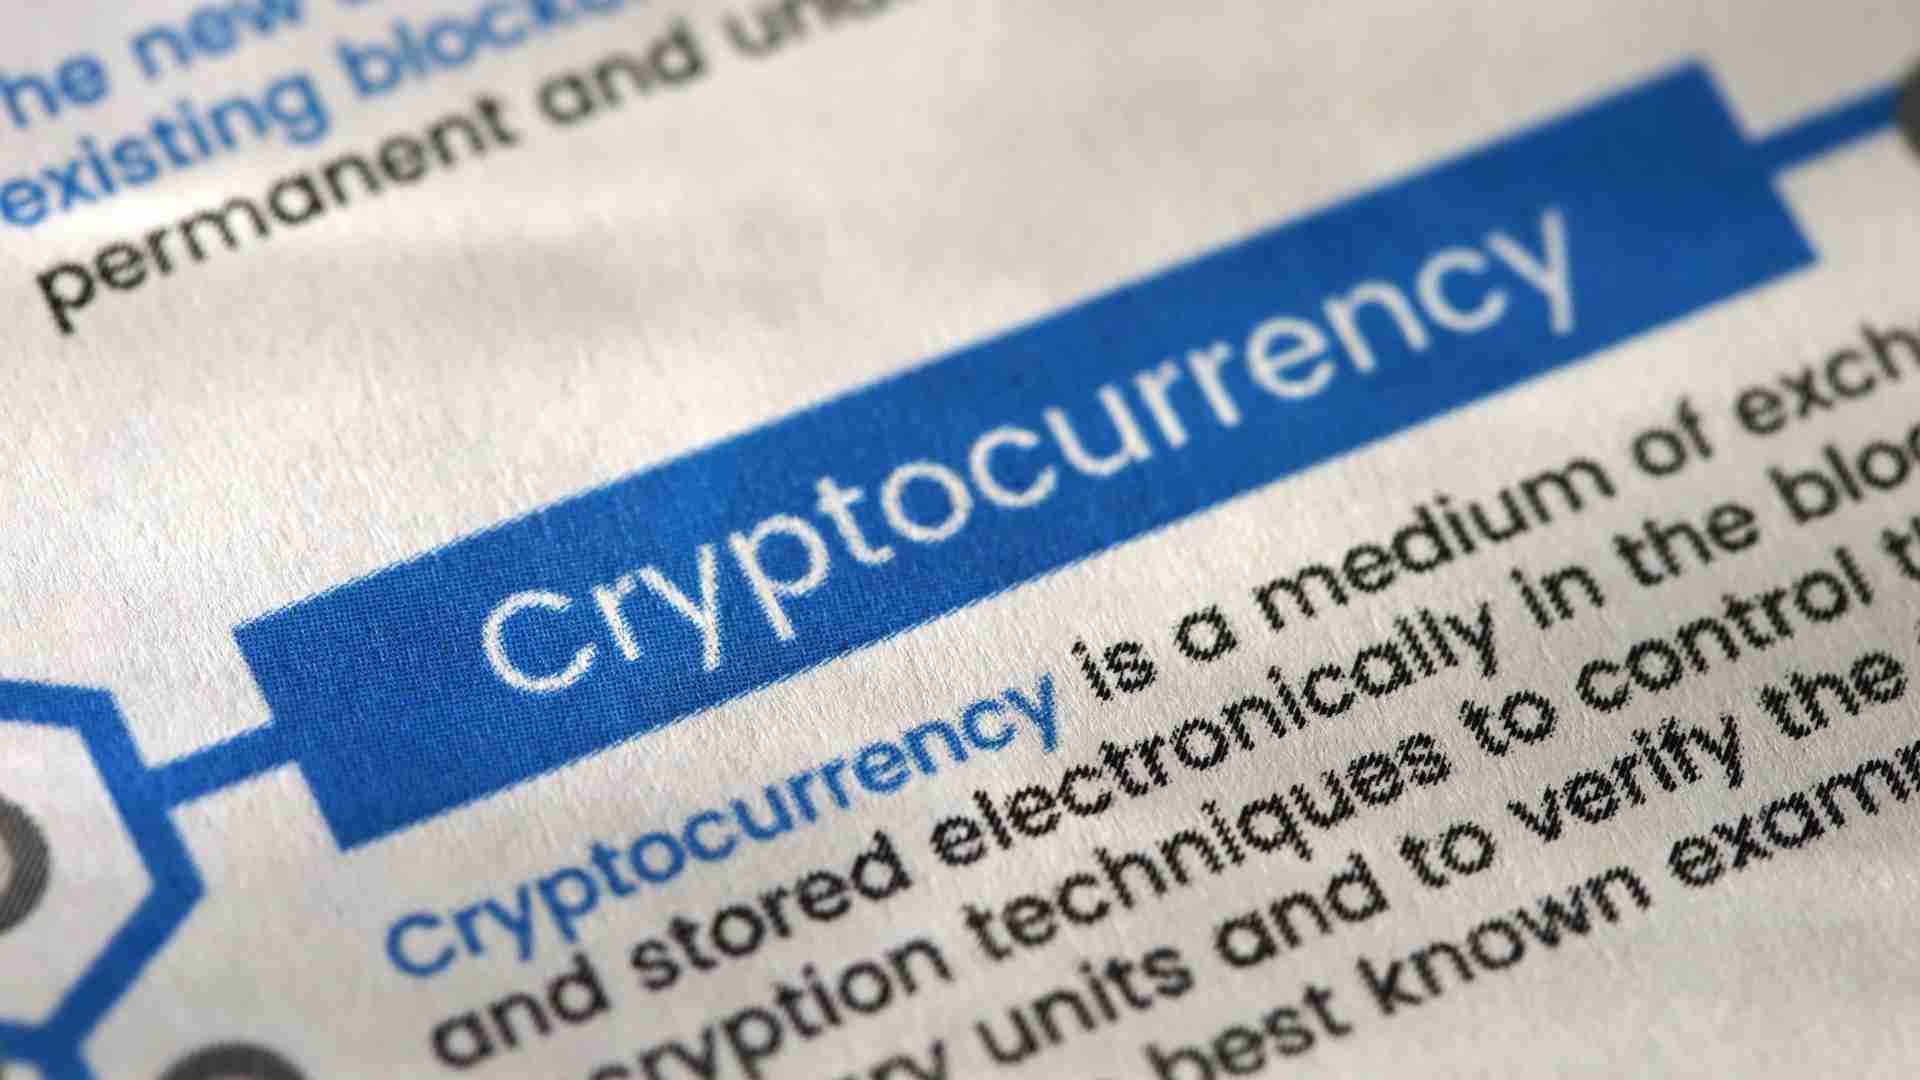 crypto for newspaper content